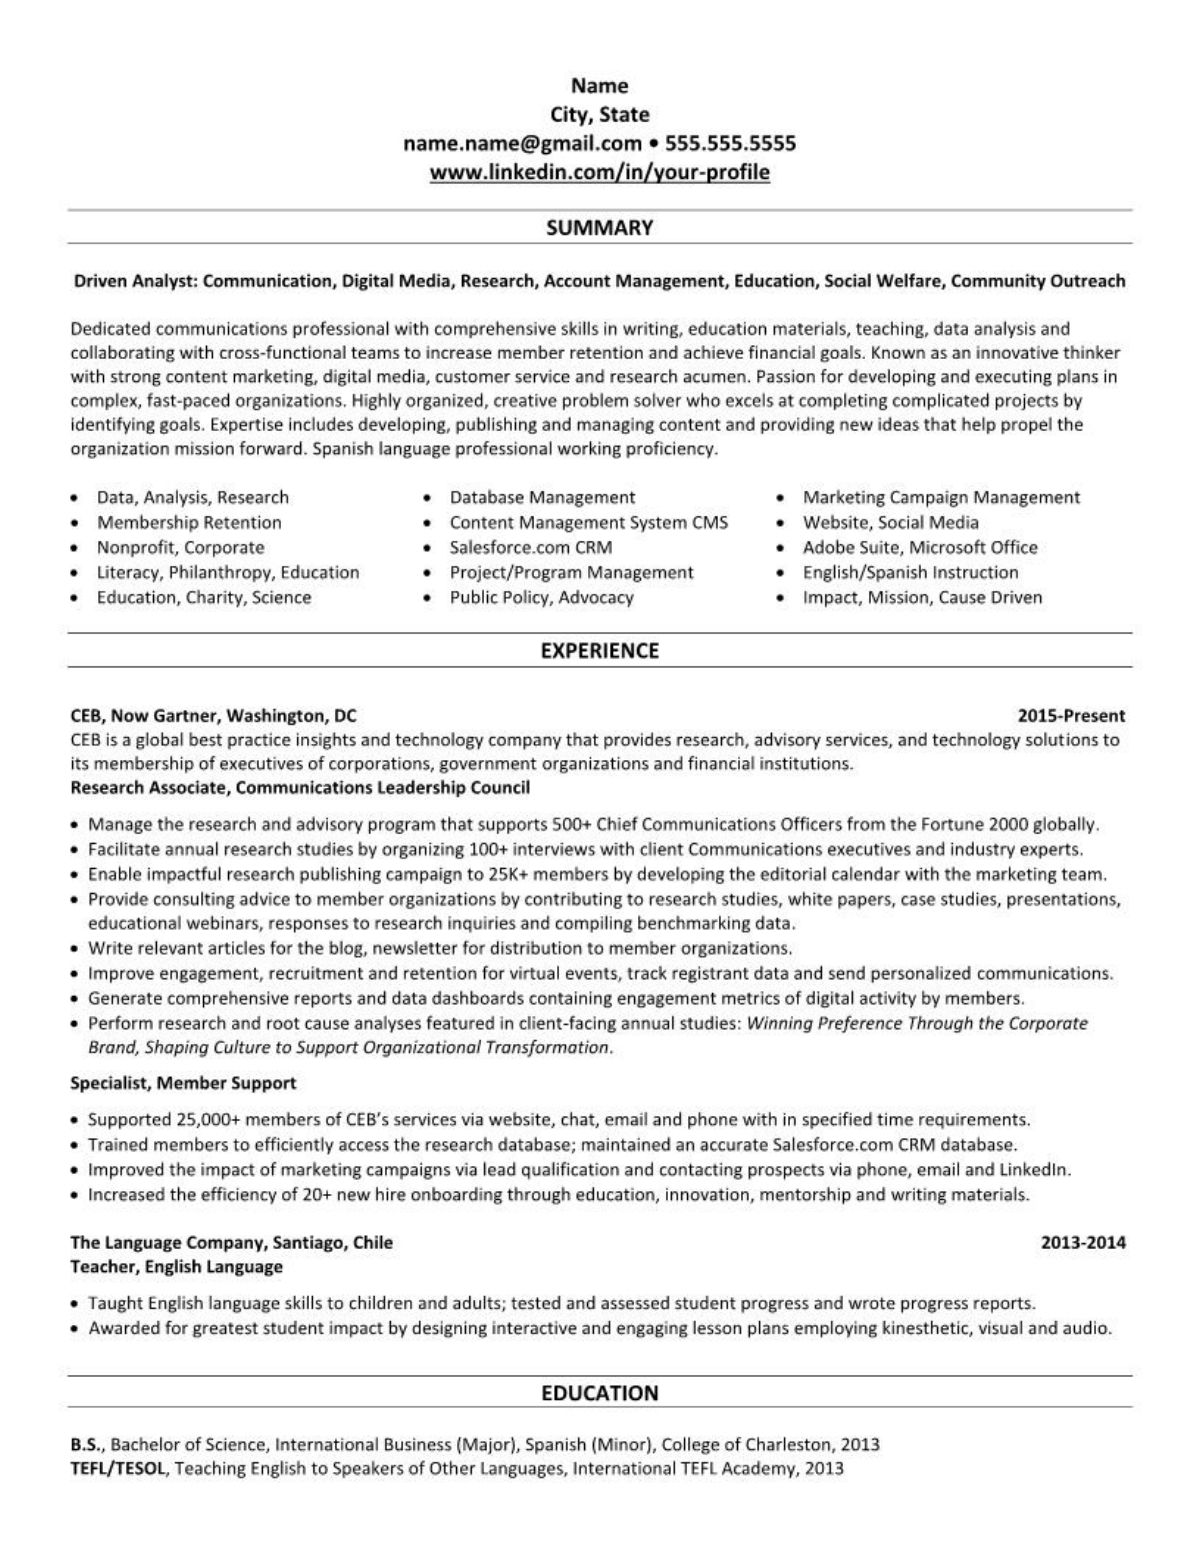 Professional resume example Entry Level early career 2151